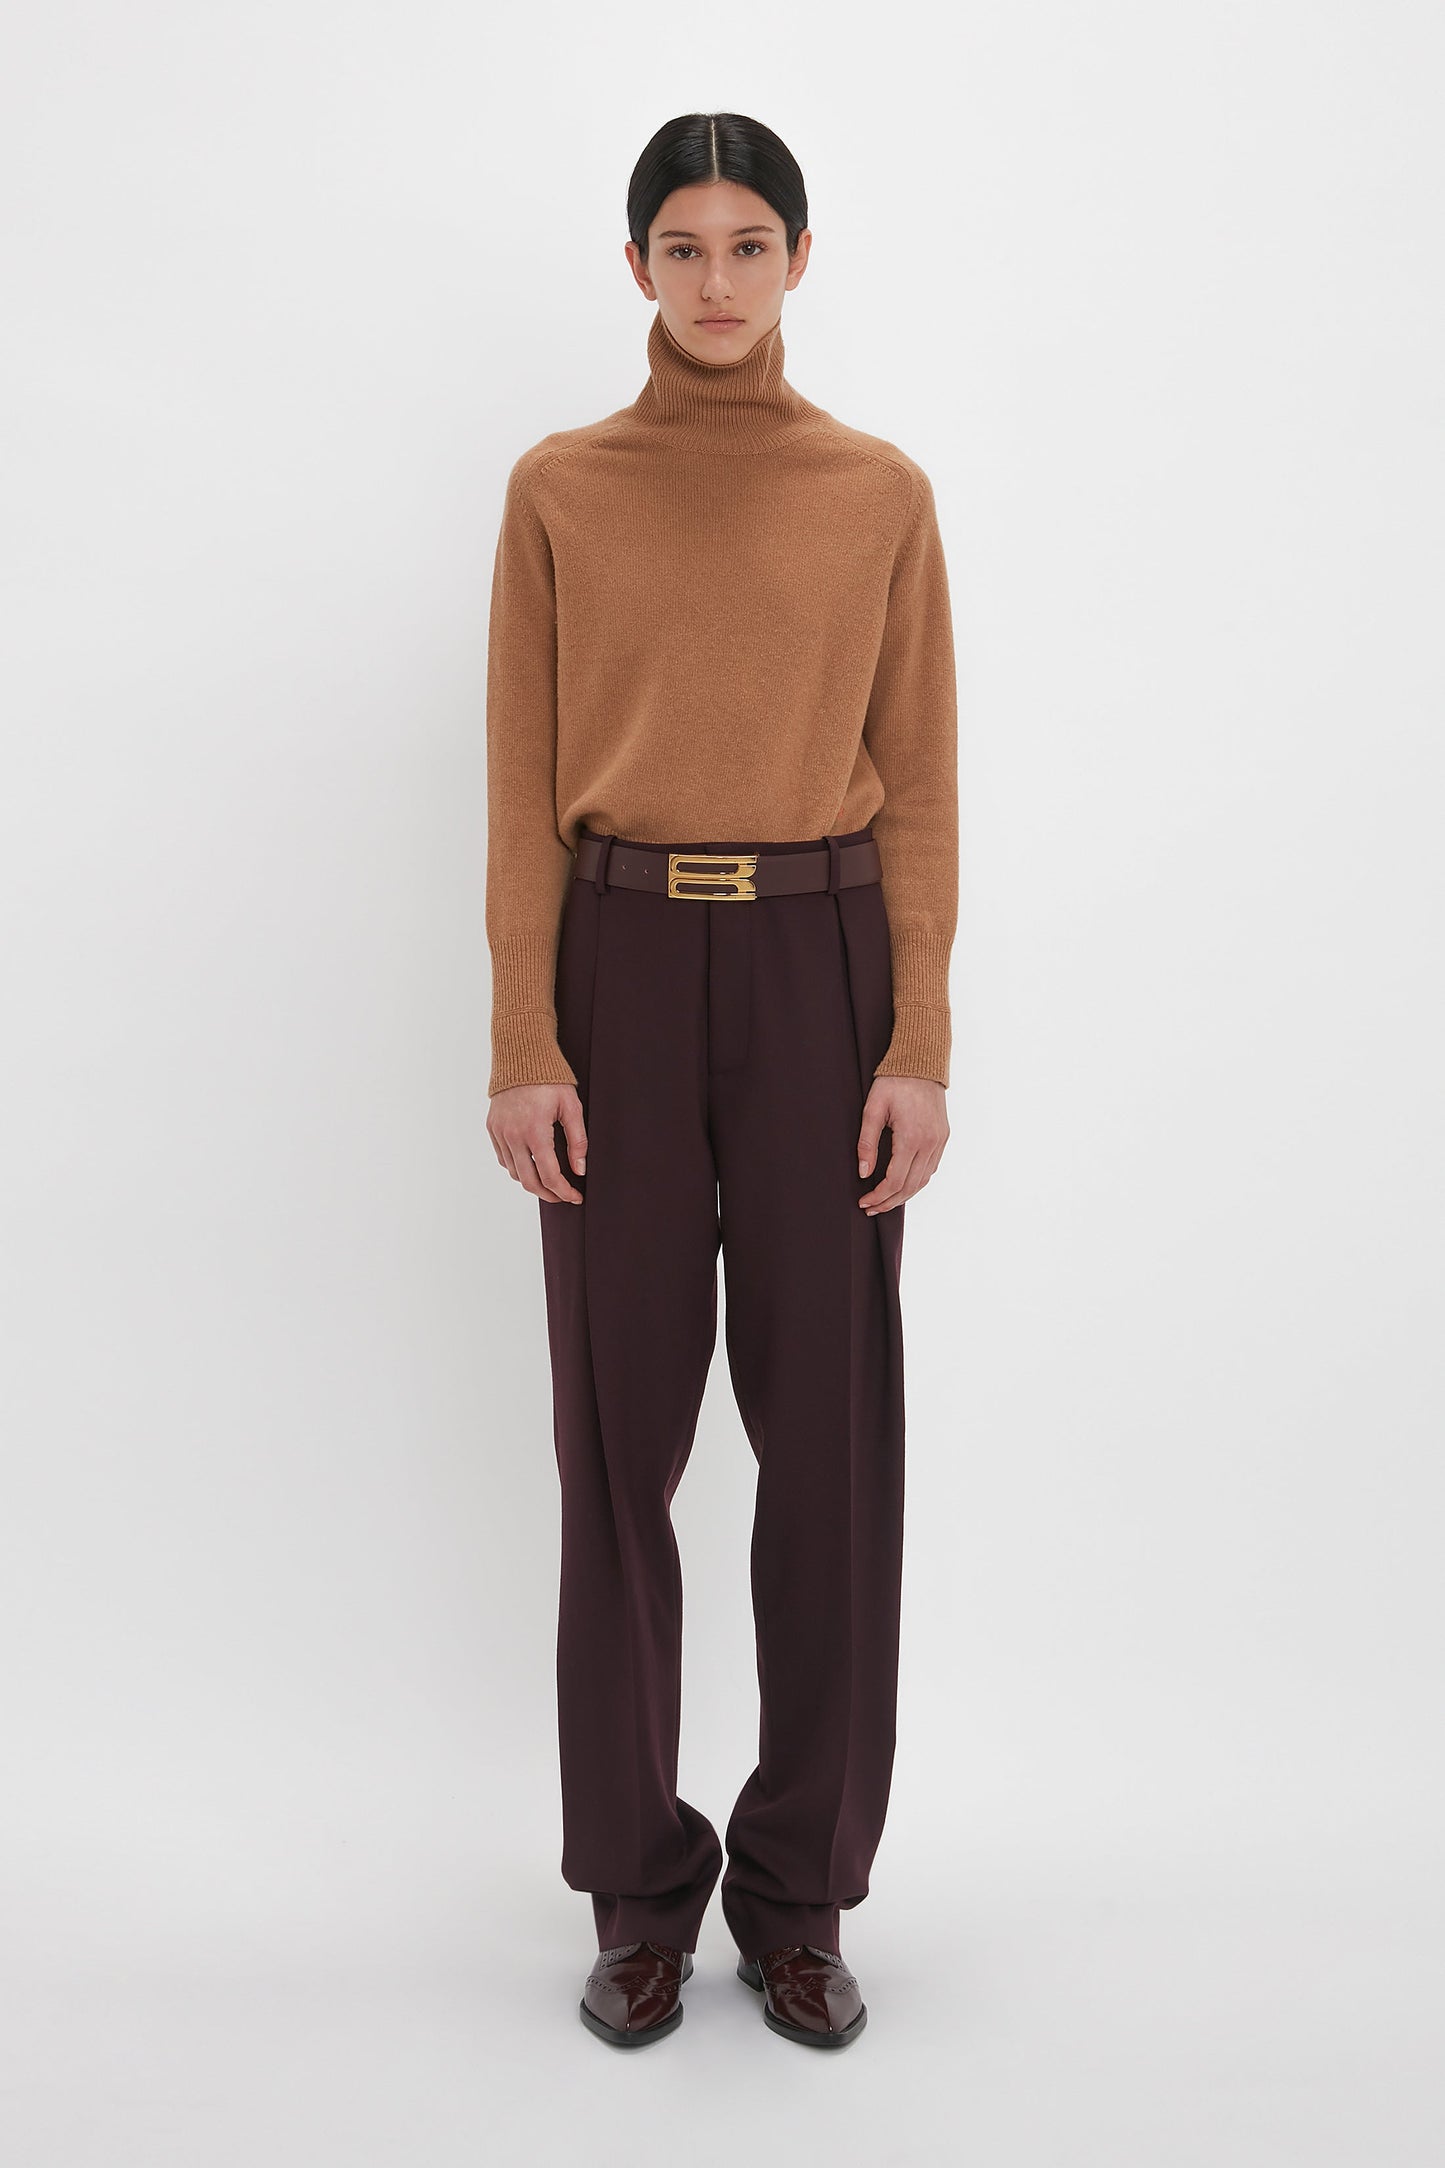 A person with dark hair wearing a brown turtleneck sweater, Victoria Beckham Asymmetric Chino Trouser In Deep Mahogany with a narrow leg silhouette, and dark shoes, standing against a plain white background.